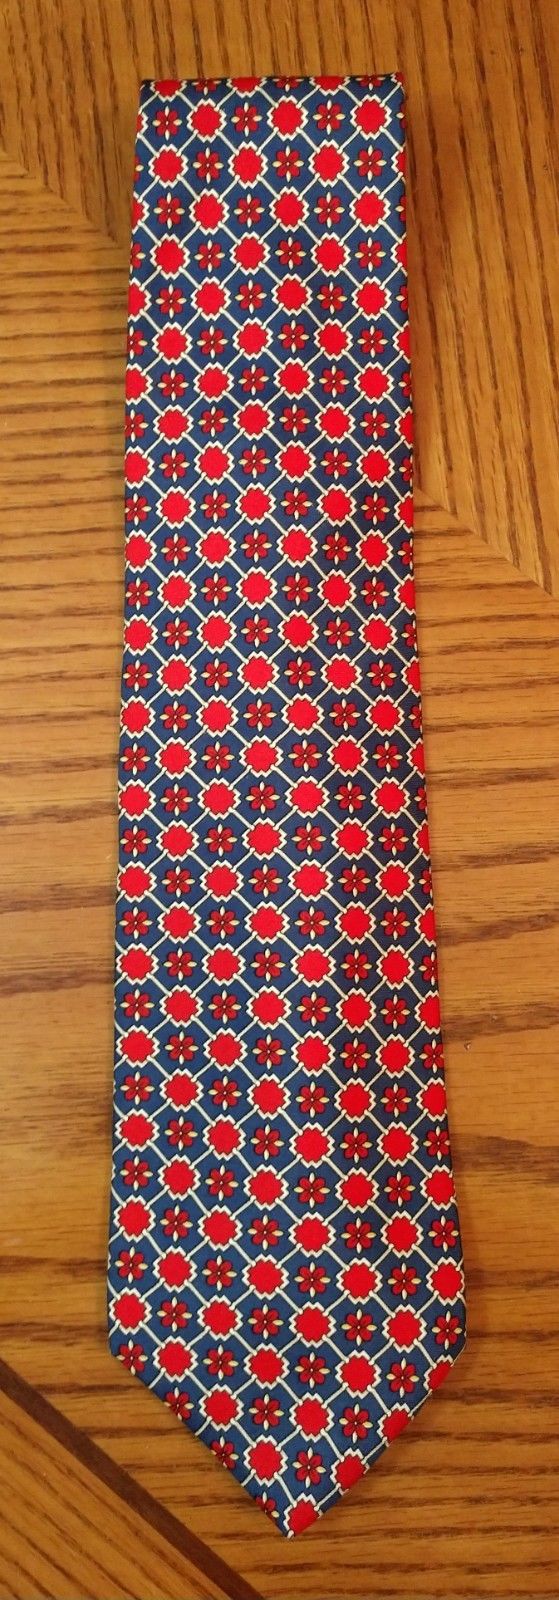 Paolo Gucci Necktie 100% Silk Made in Italy Blue Red&White EUC VTG